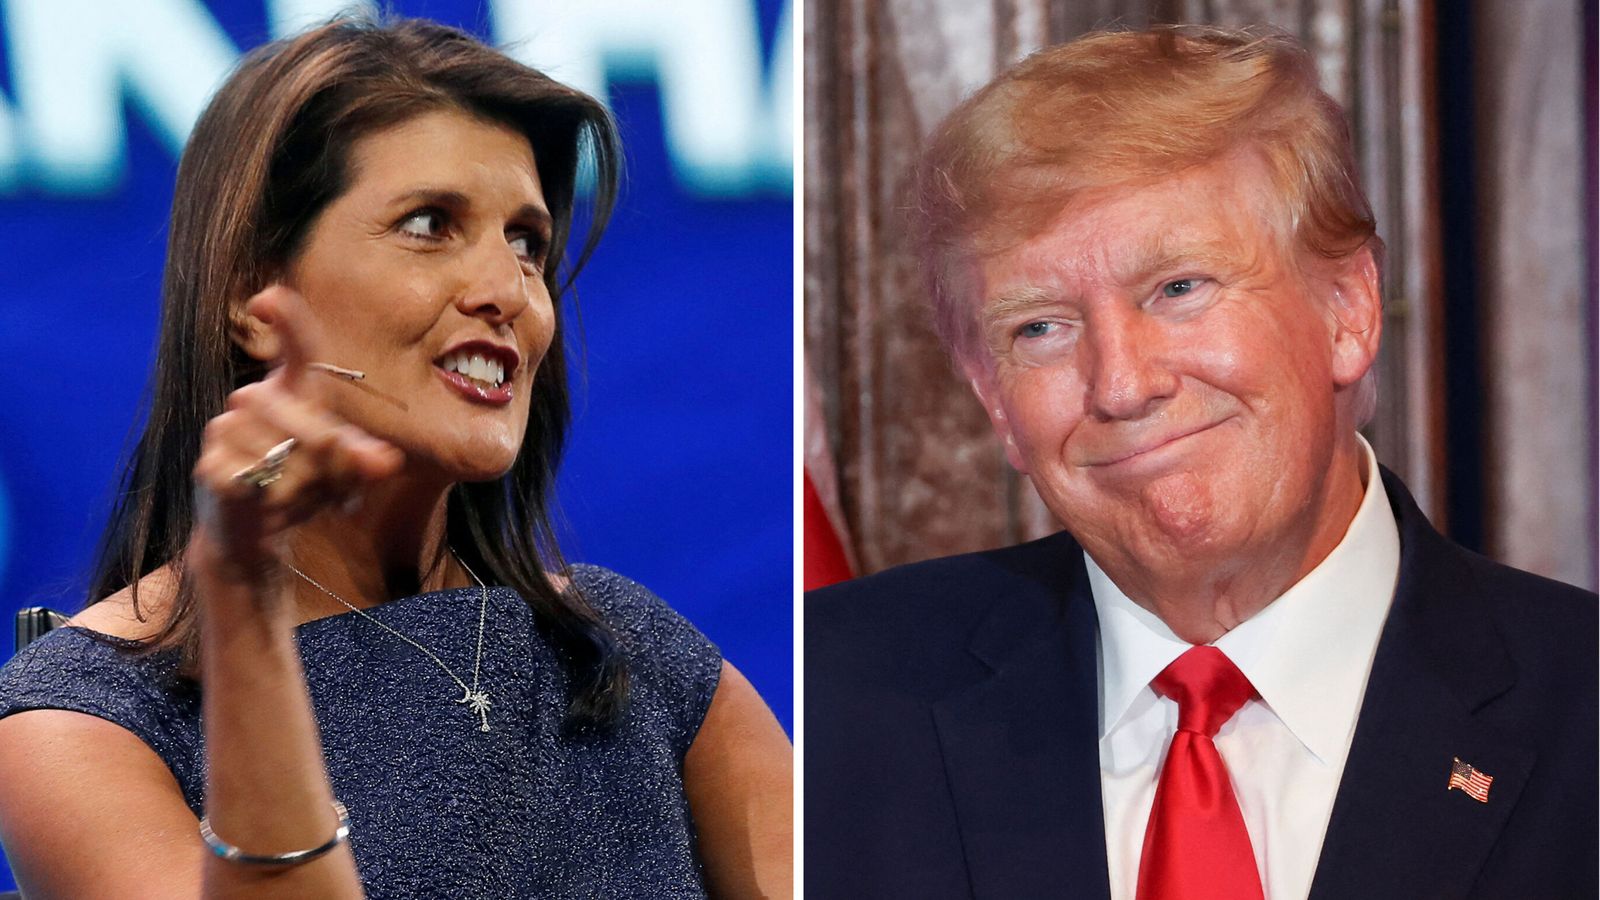 Nikki Haley to challenge Donald Trump for 2024 Republican presidential